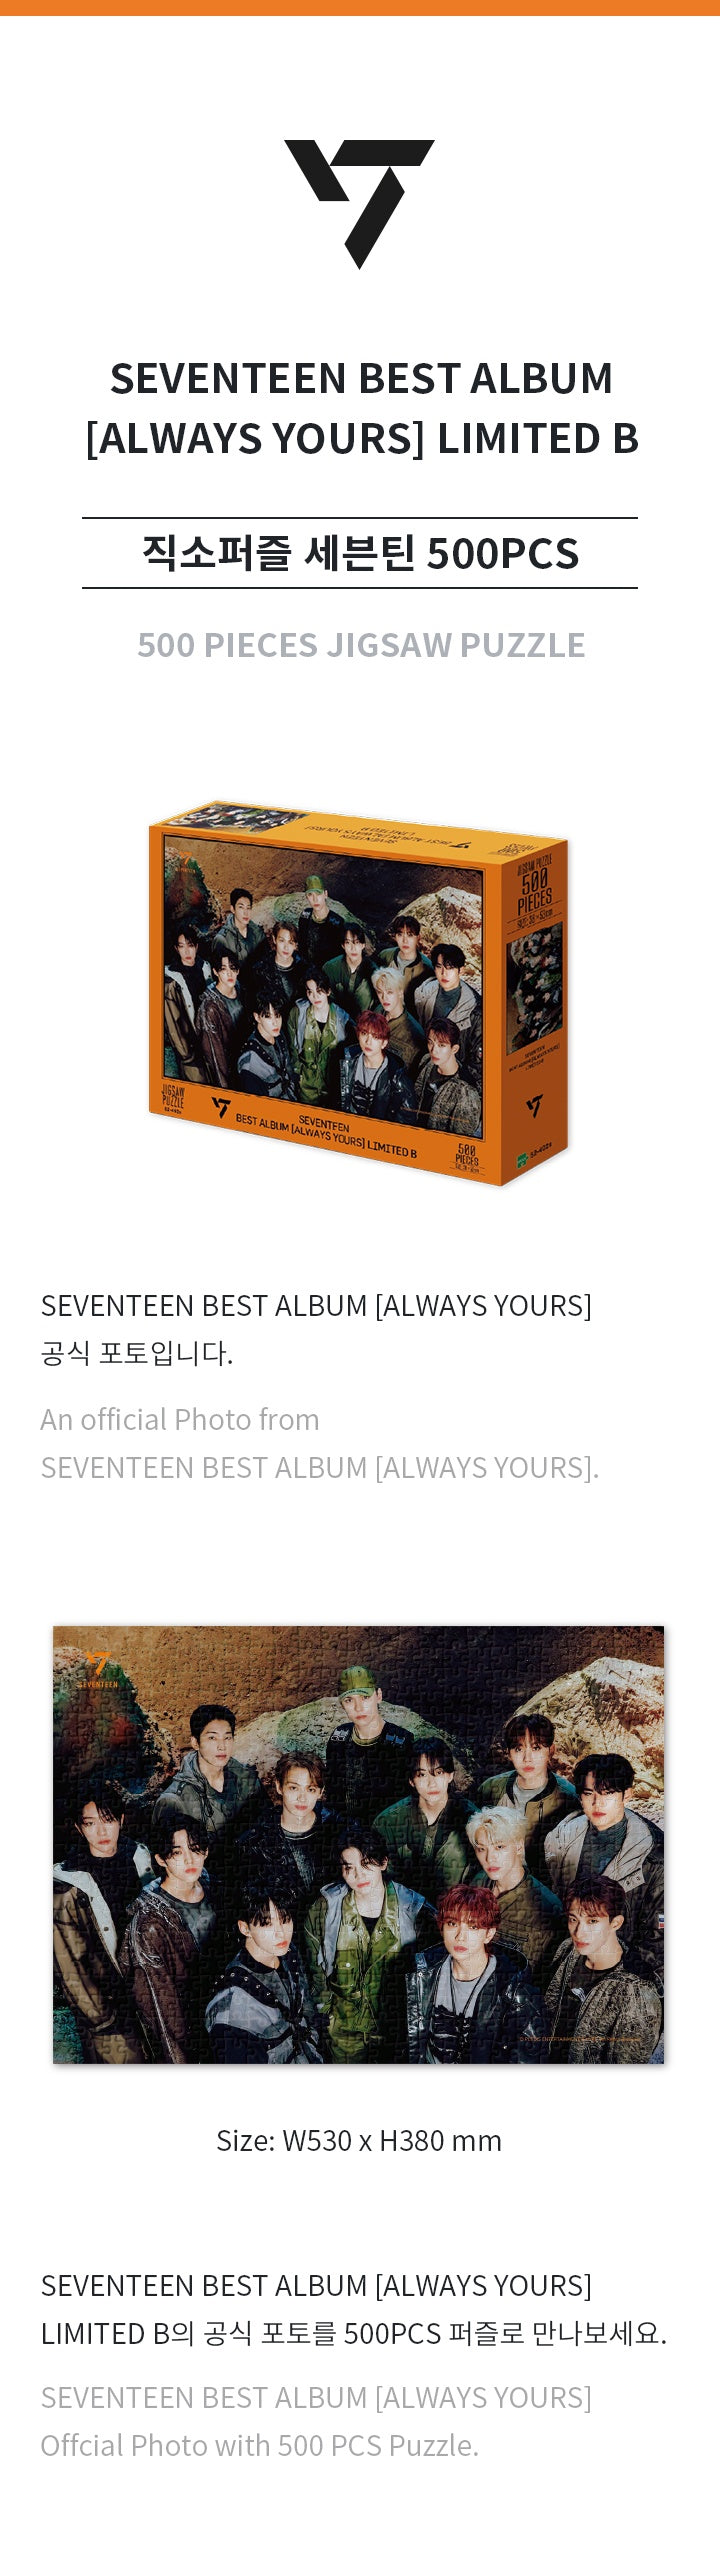 SEVENTEEN 500 PIECES JIGSAW PUZZLE (ALWAYS YOURS)